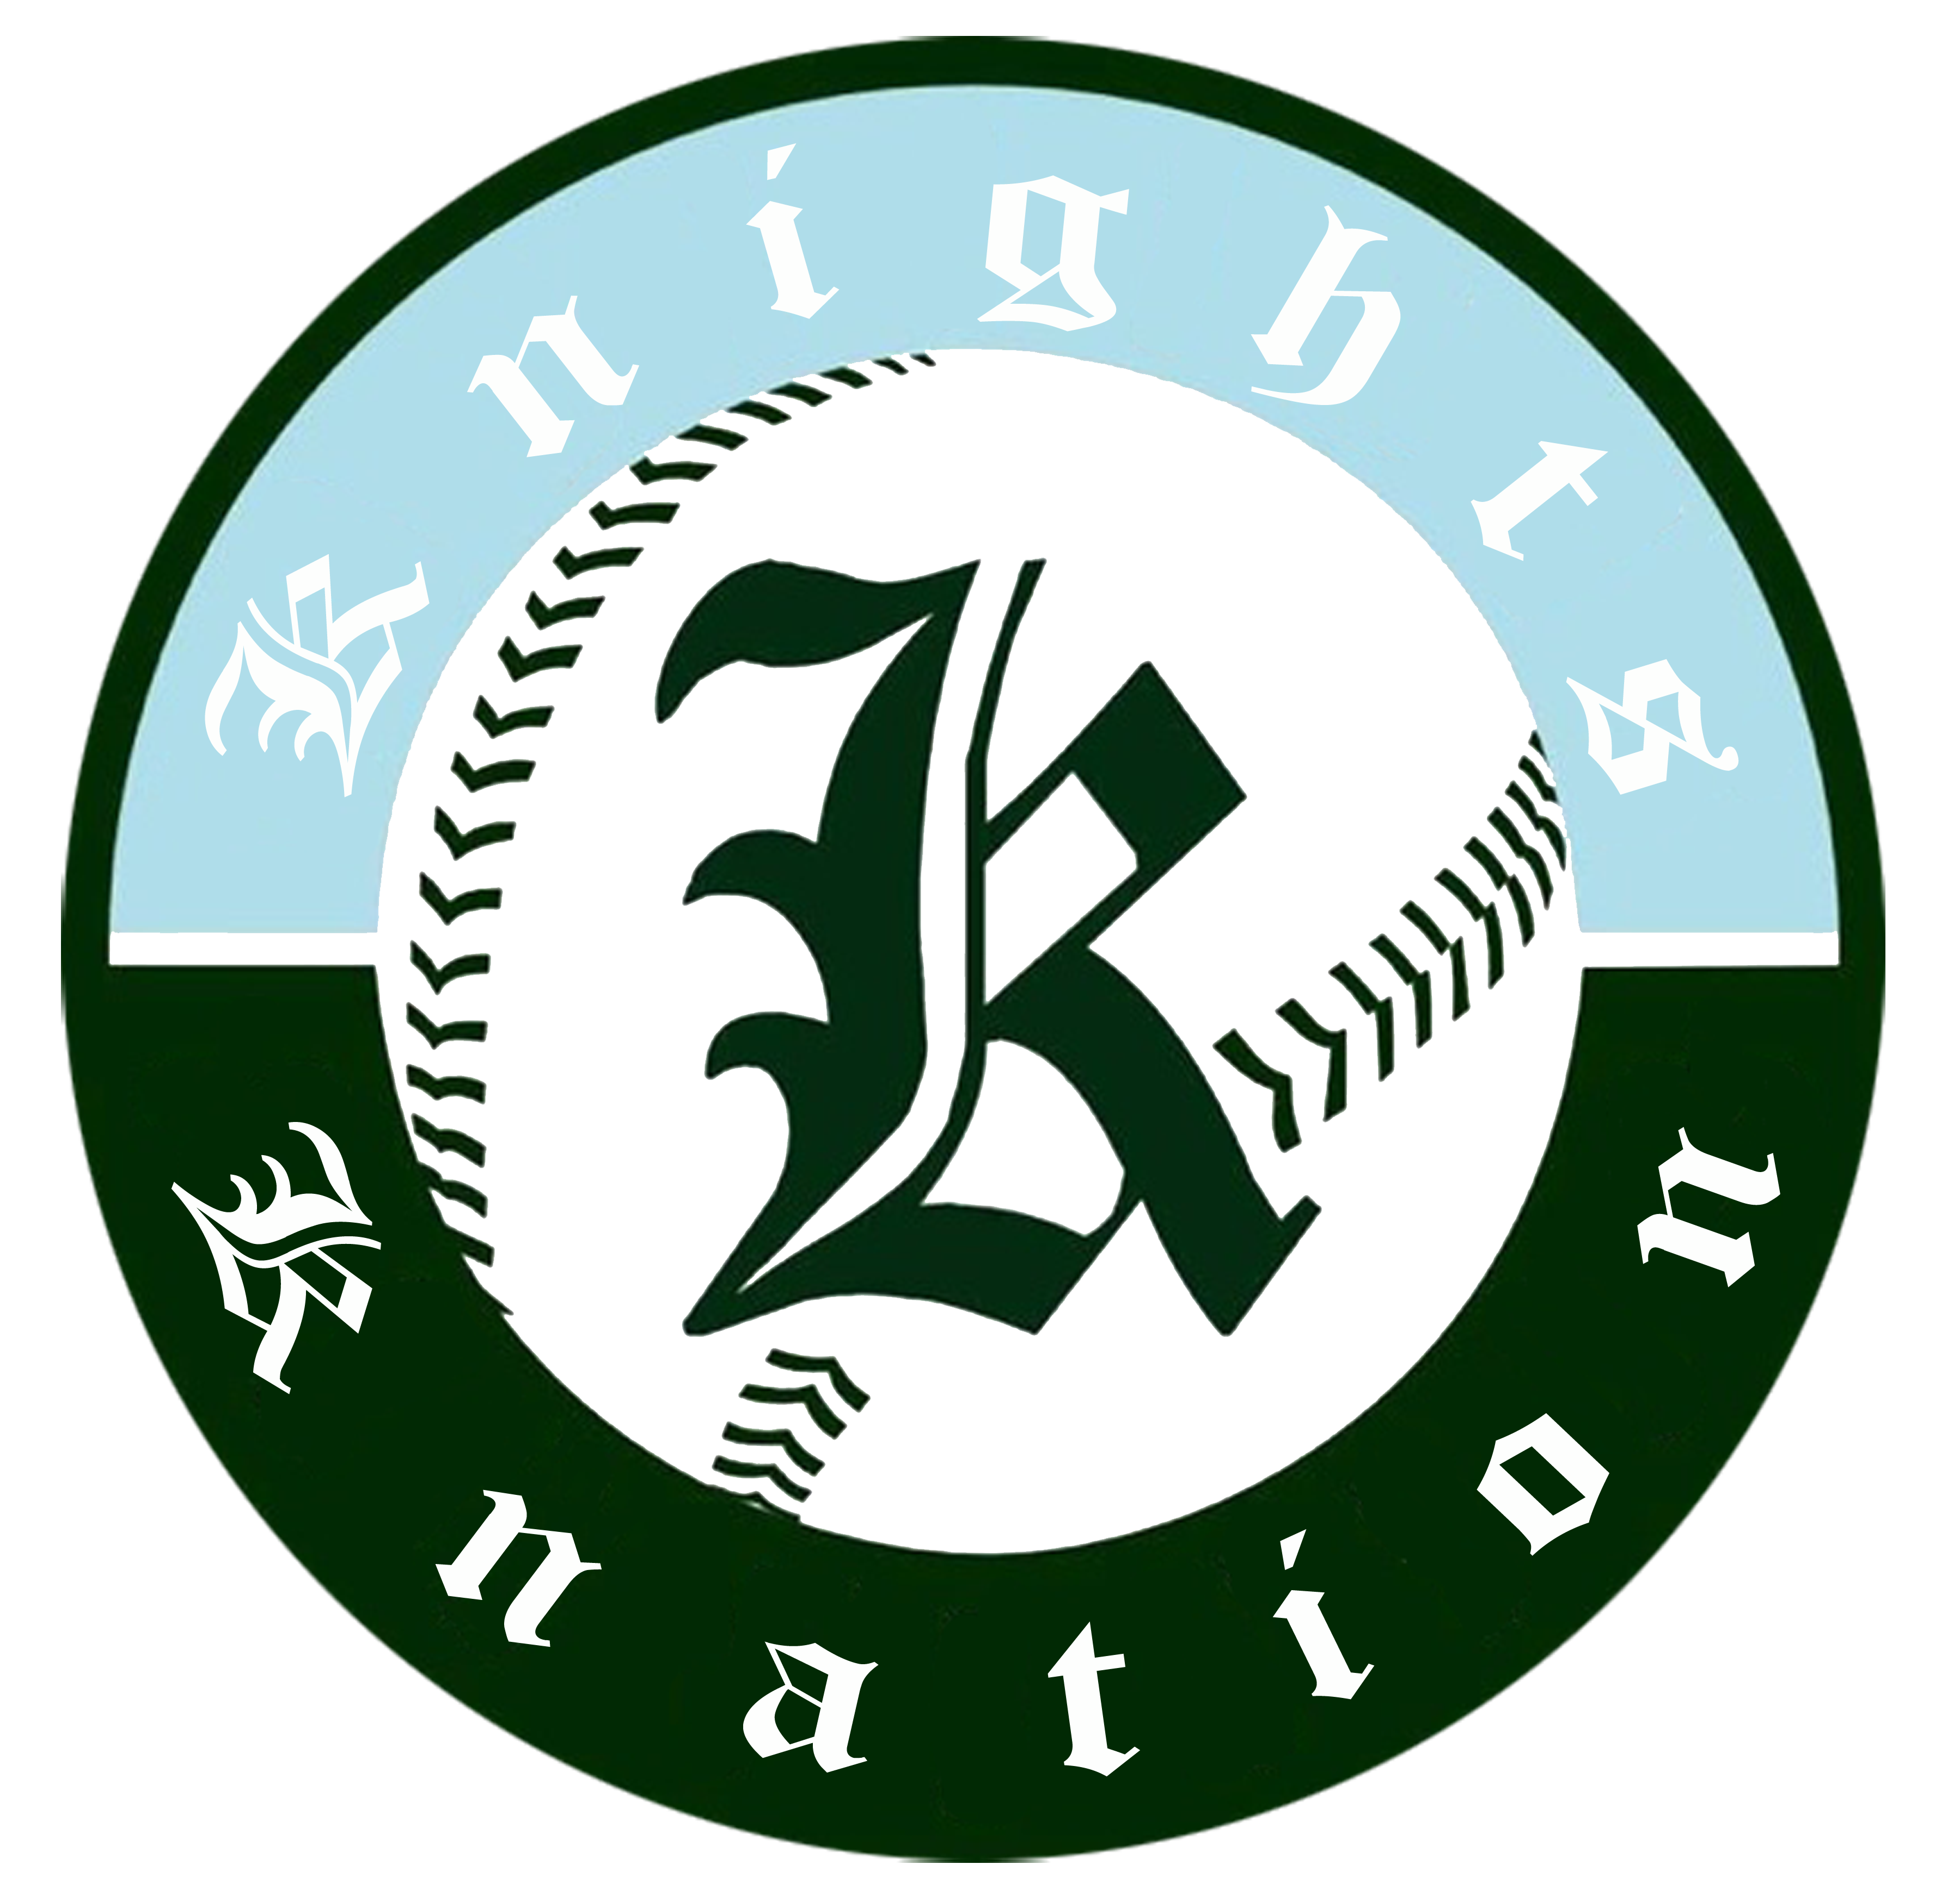 Knights Knation/Dodgers Scout Team - Perfect Game Baseball Association